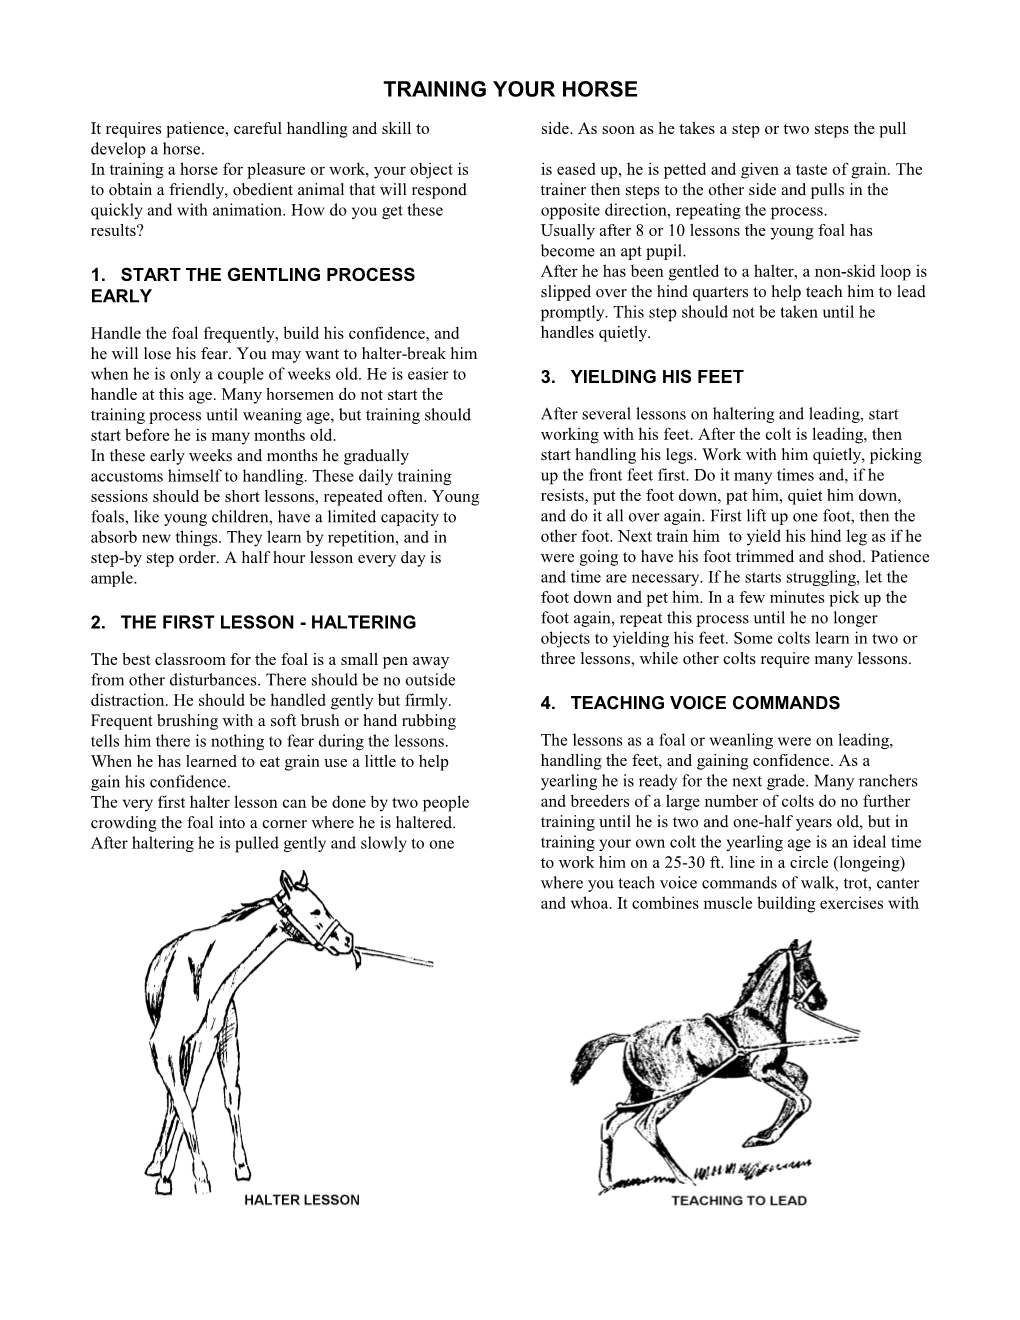 Training Your Horse